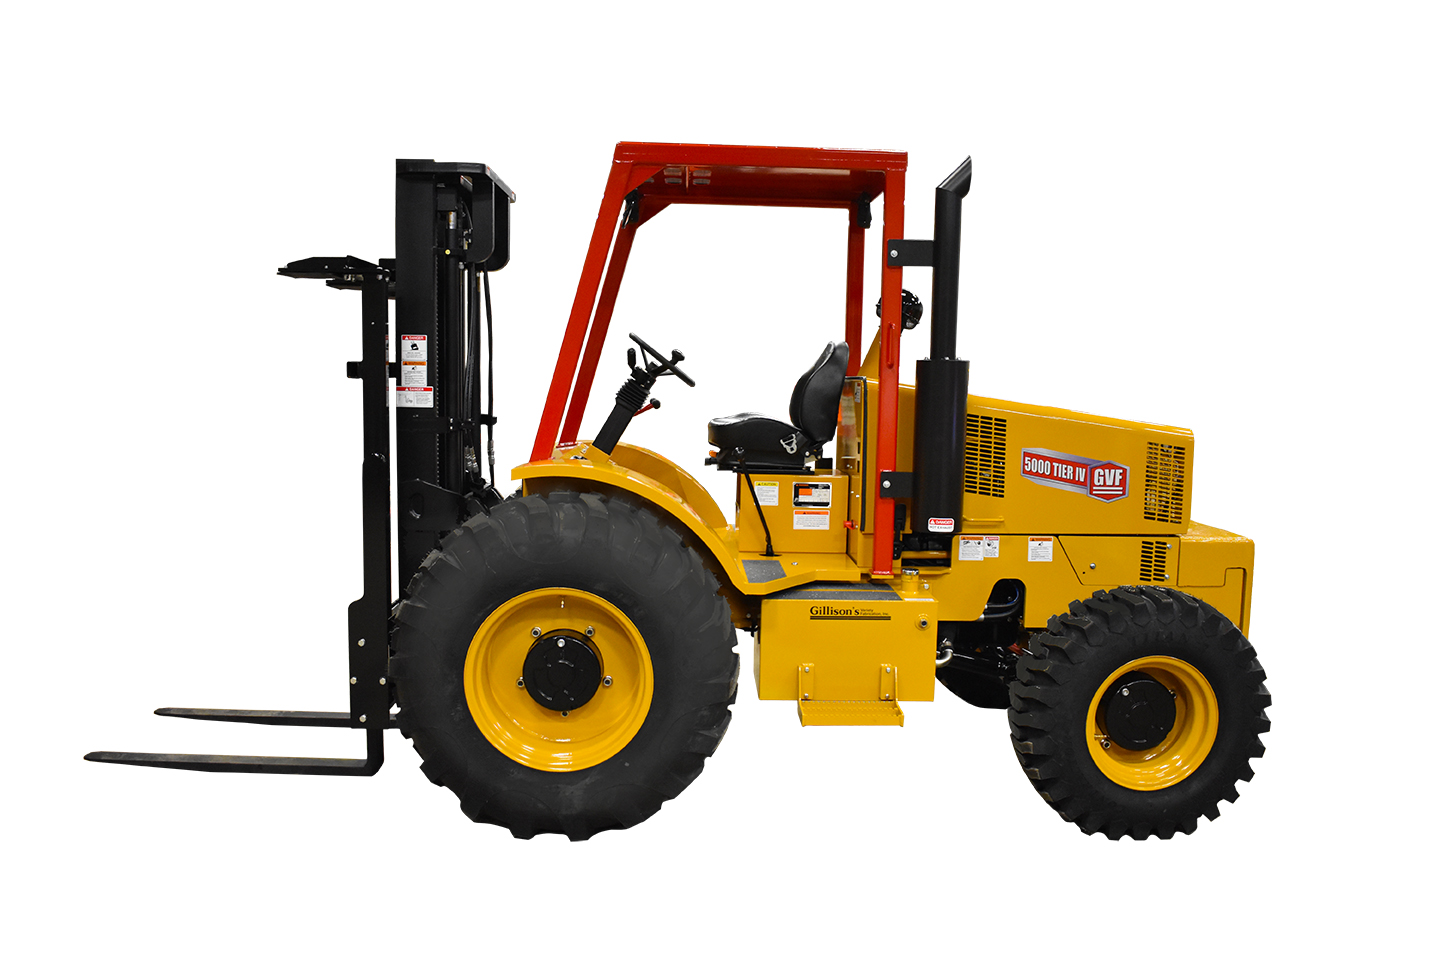 Tier 4 Rough Terrain Forklifts Available In 3 Models